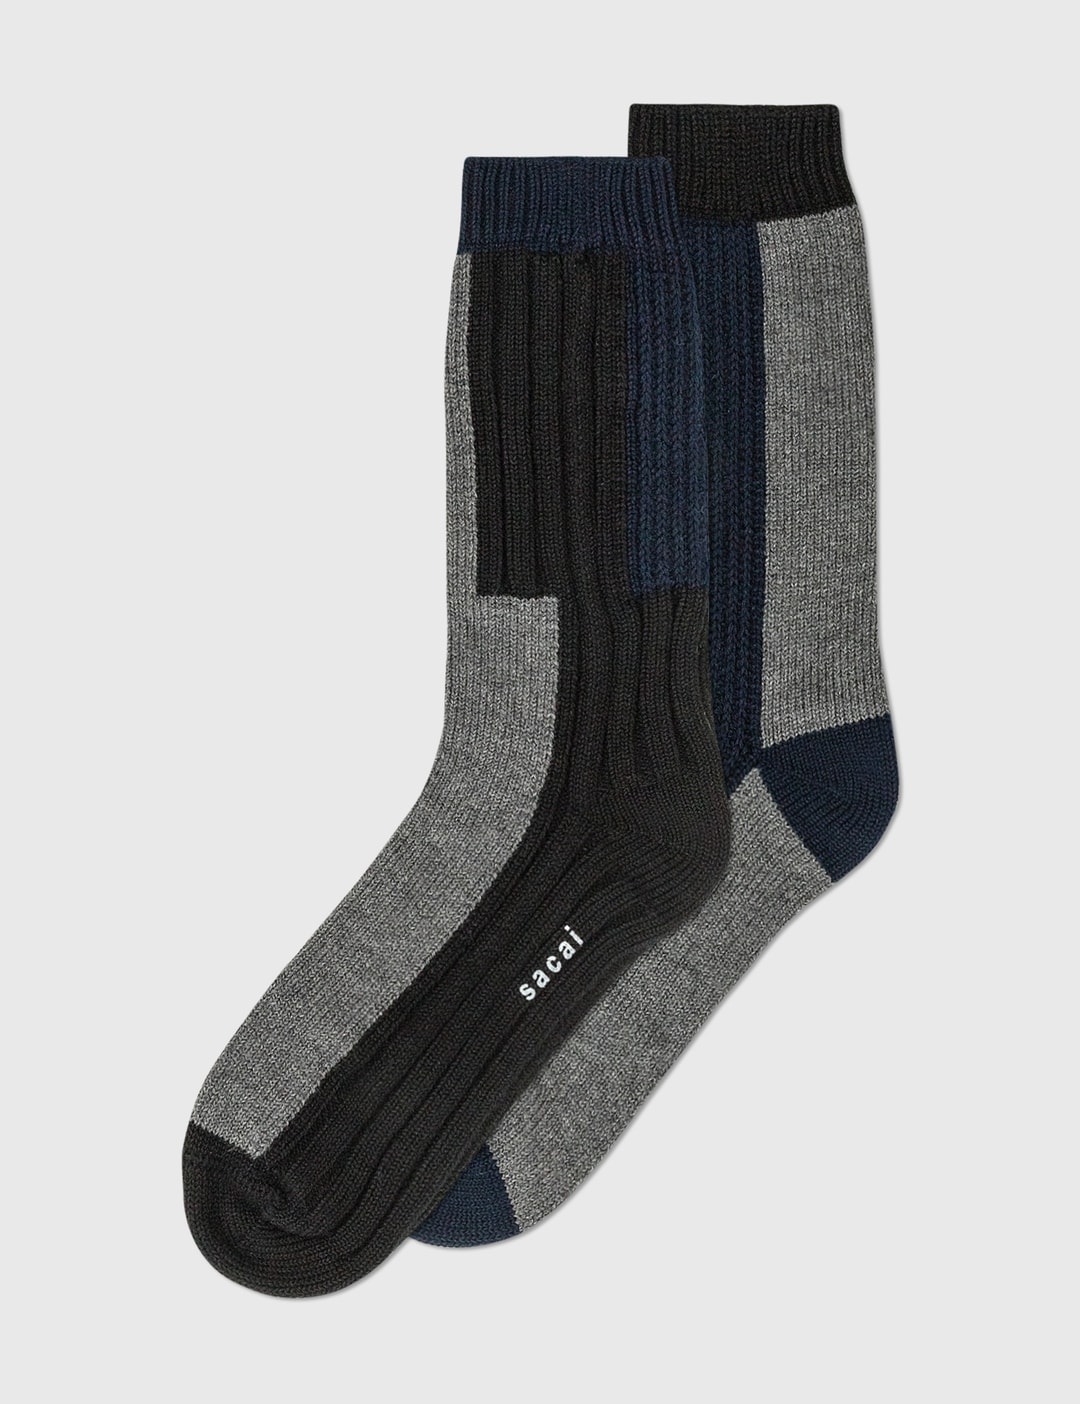 Sacai - Socks | HBX - Globally Curated Fashion and Lifestyle by Hypebeast